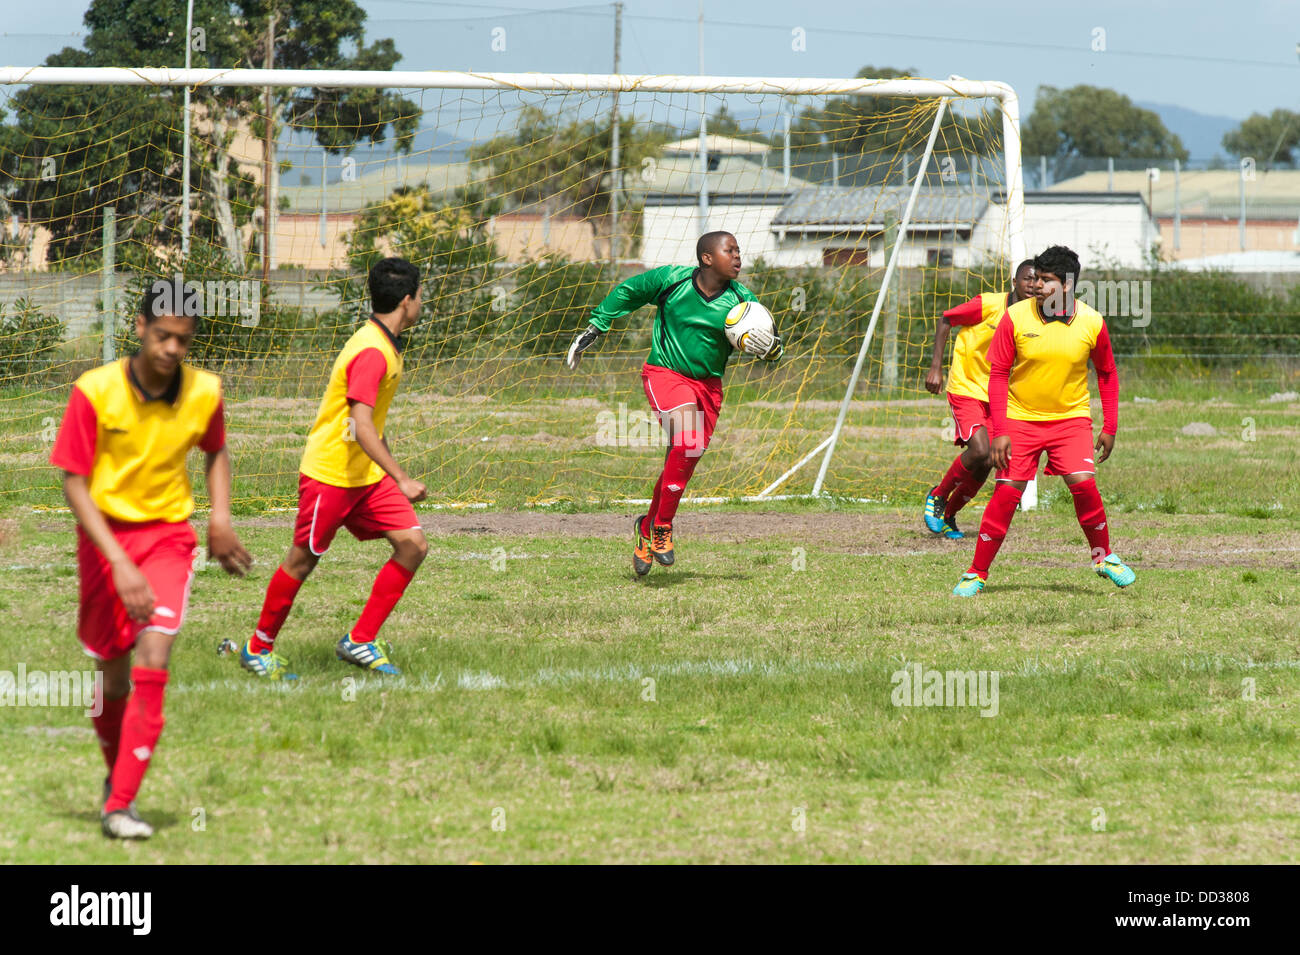 U15B football goalkeeper in action playing a match Cape Town, South Africa Stock Photo